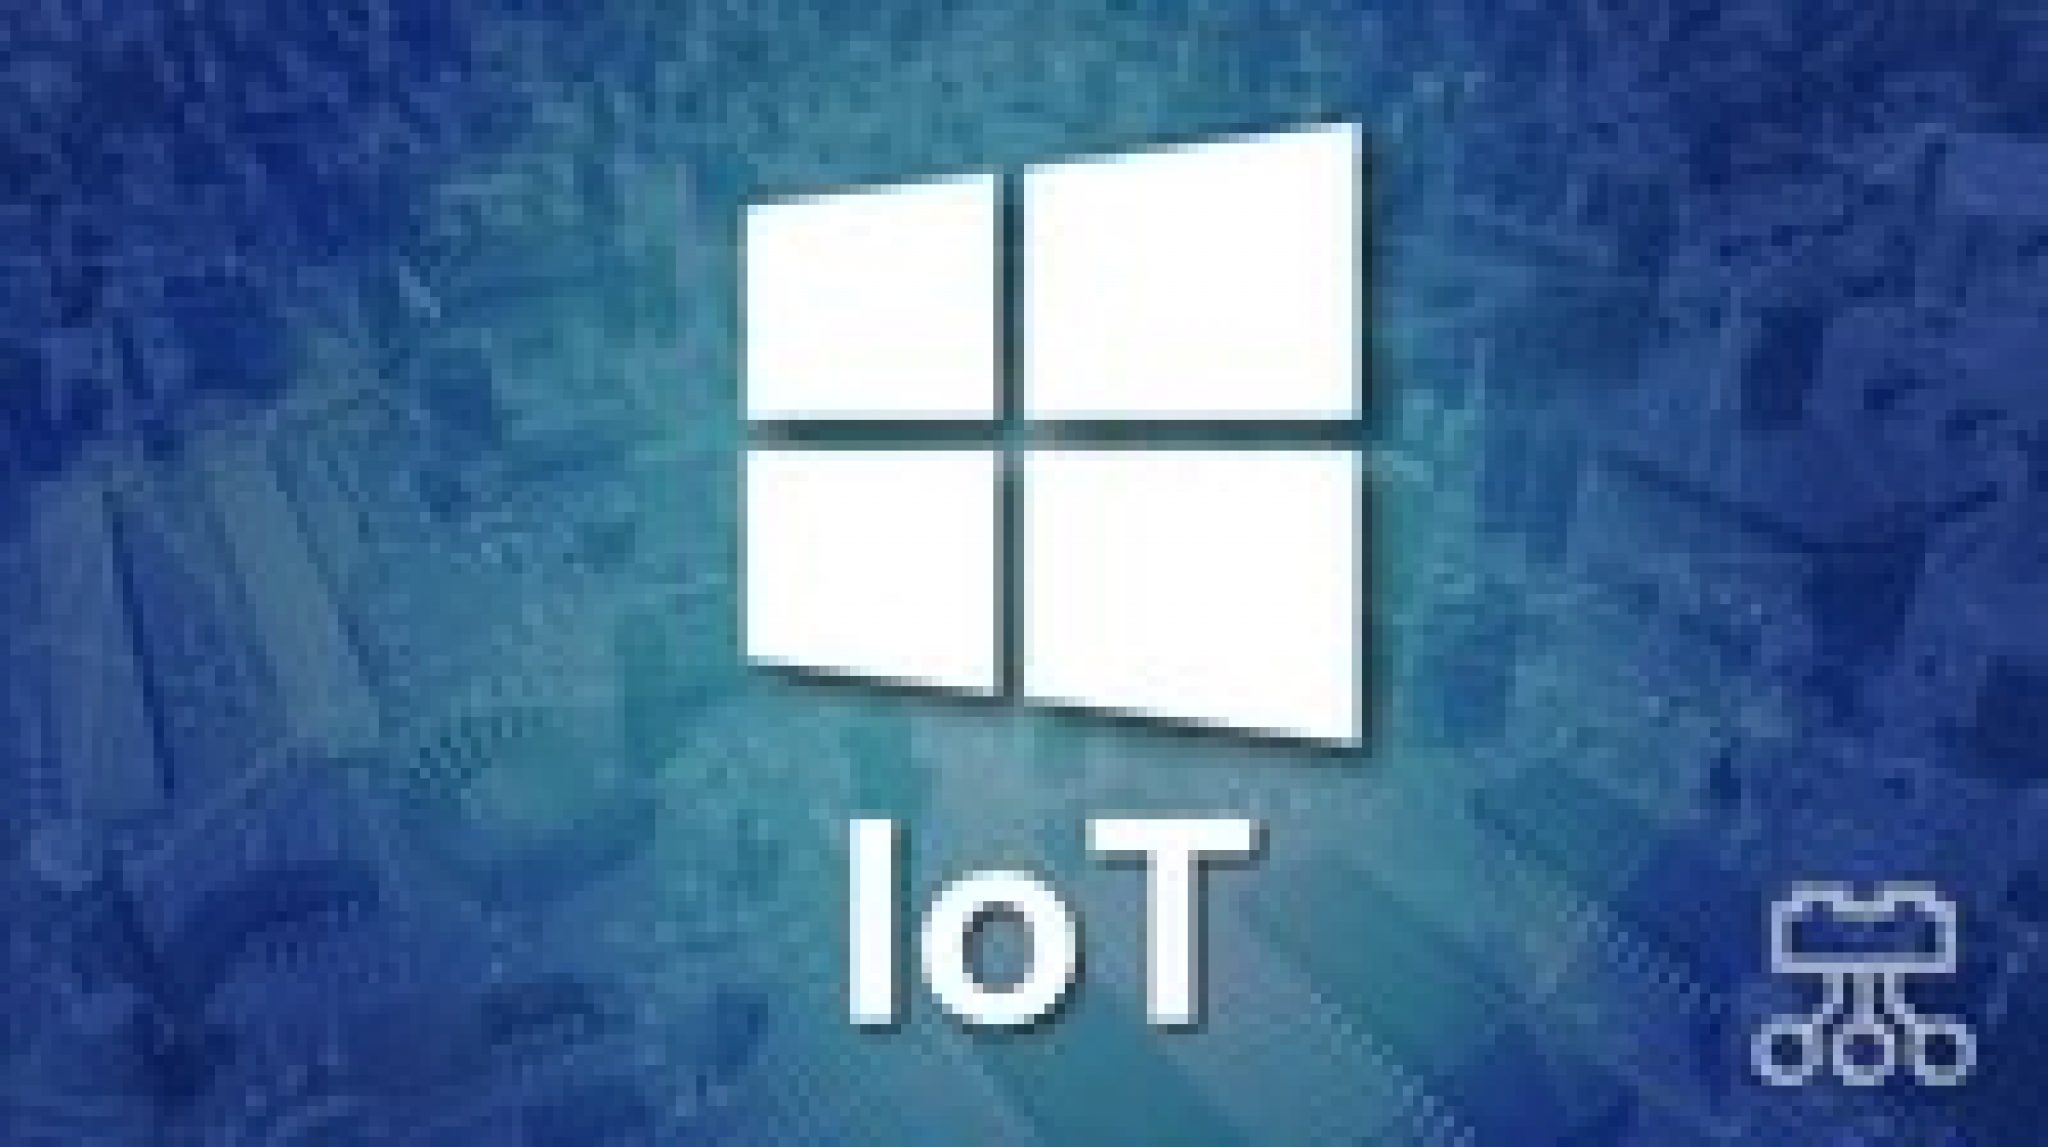 c compiler for windows 10 iot